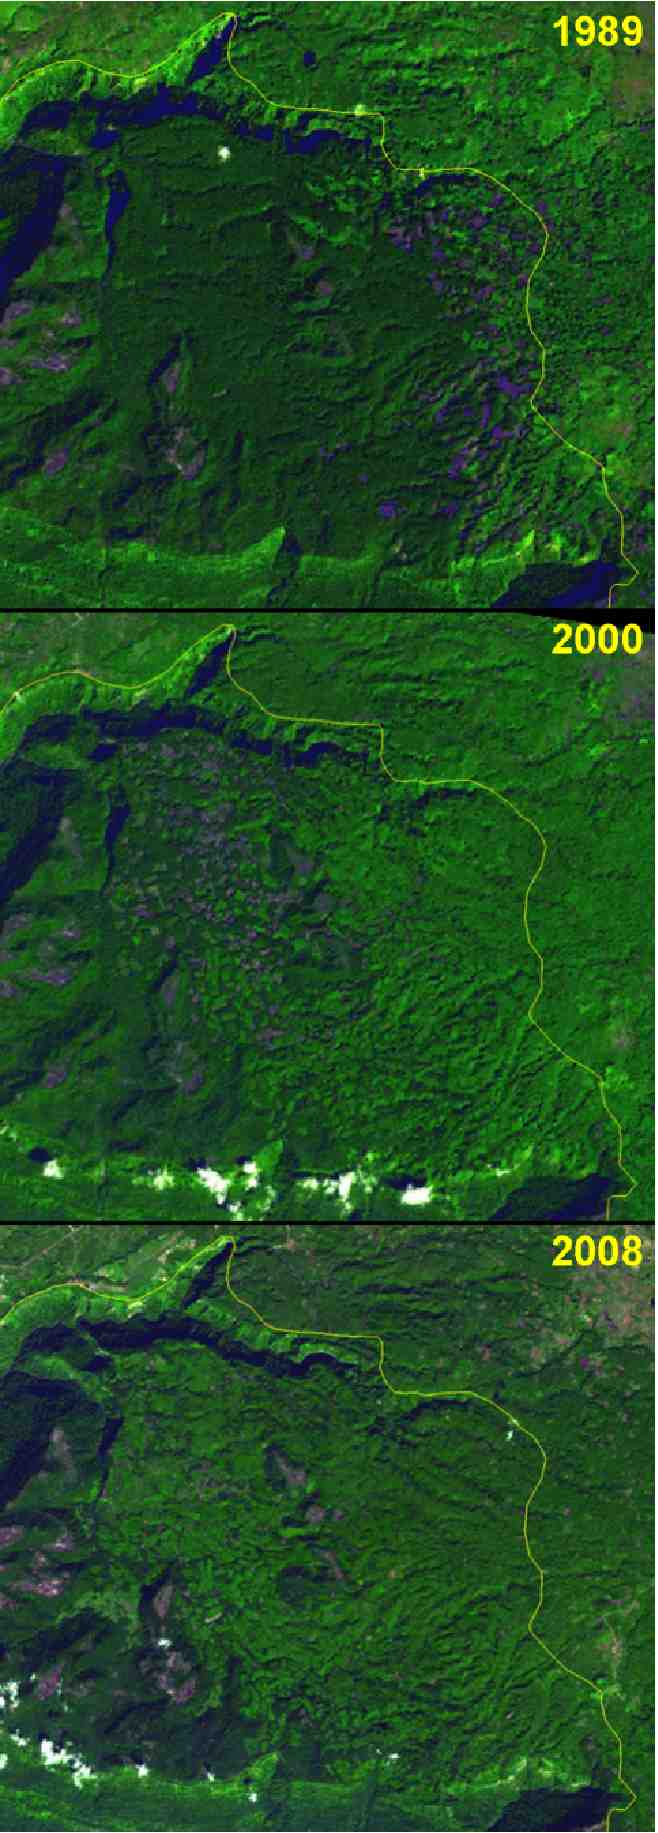 Figure 1. The Bolavan plateau in the Dong Hua Sao reserved forest of southern Lao PDR. In the top image from 1989 the dark green area is intact forest. The lighter green area outside of the park boundary, and the patches inside the boundary, are agriculture, primarily coffee. In the middle image from 2000 the patches of agriculture have extended across nearly the entire plateau, roughly 100 square km in area. The December, 2008 image shows how the area between the patches has filled in.